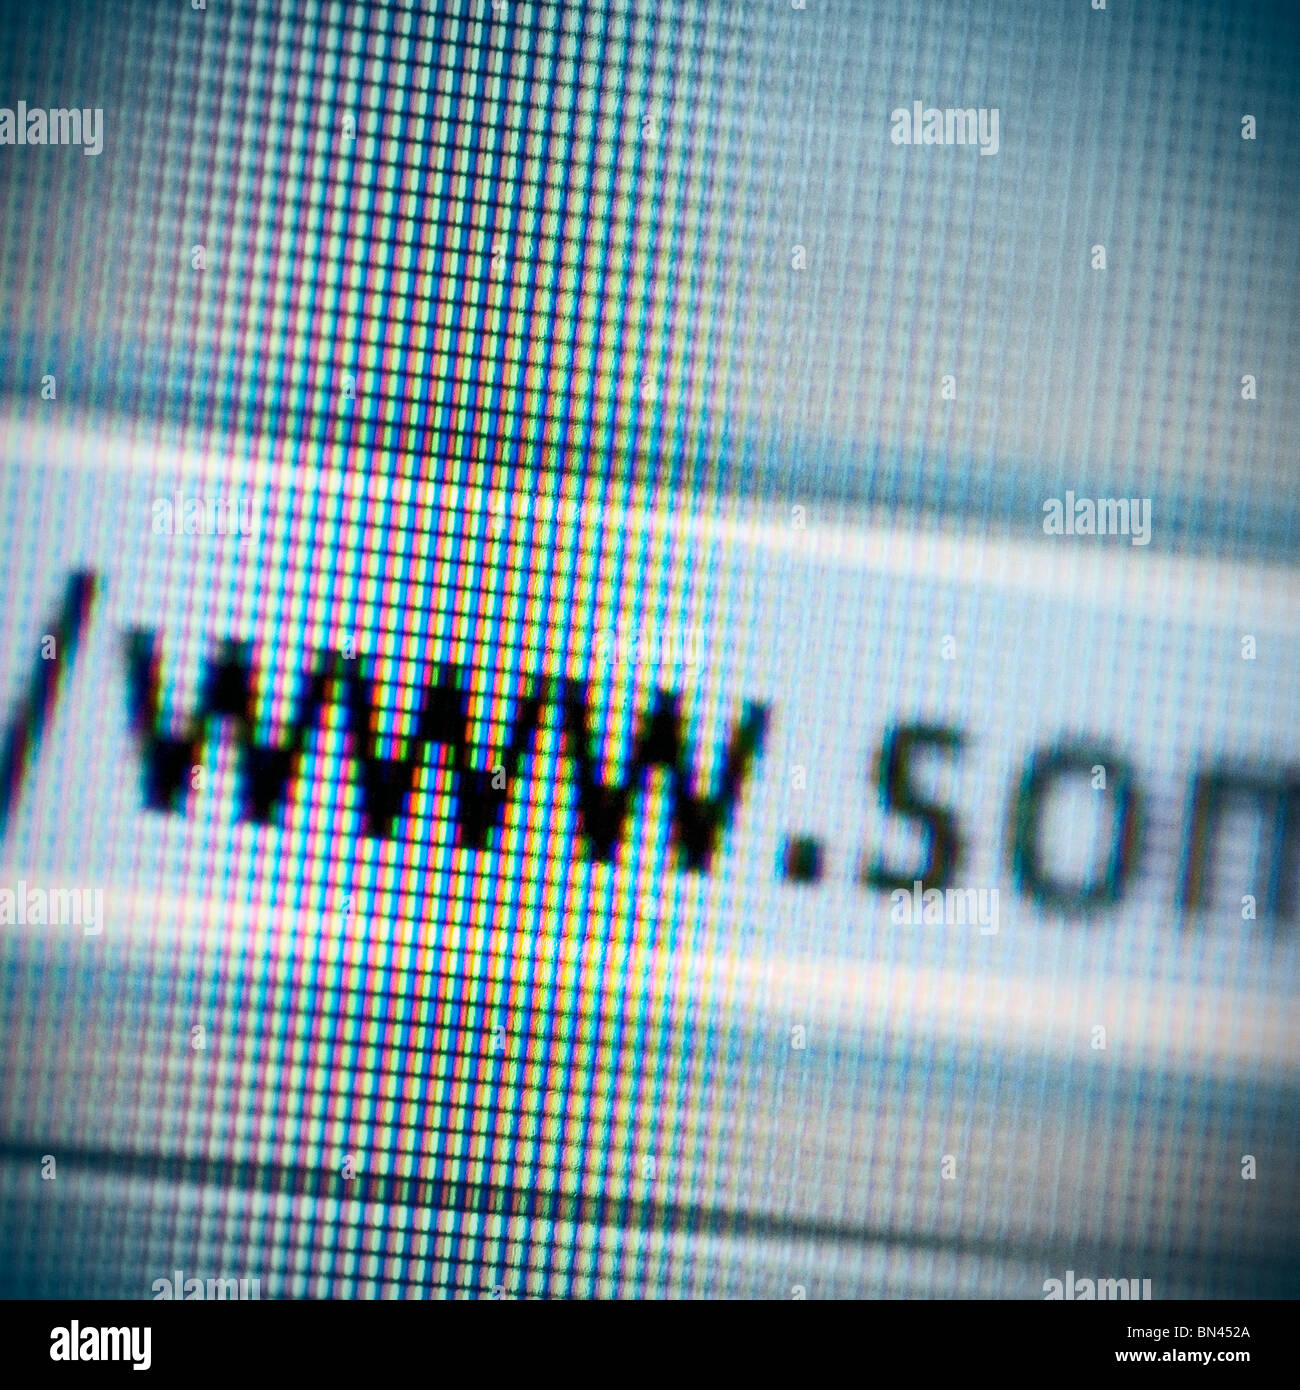 closeup of www sign on a textured monitor screeen Stock Photo